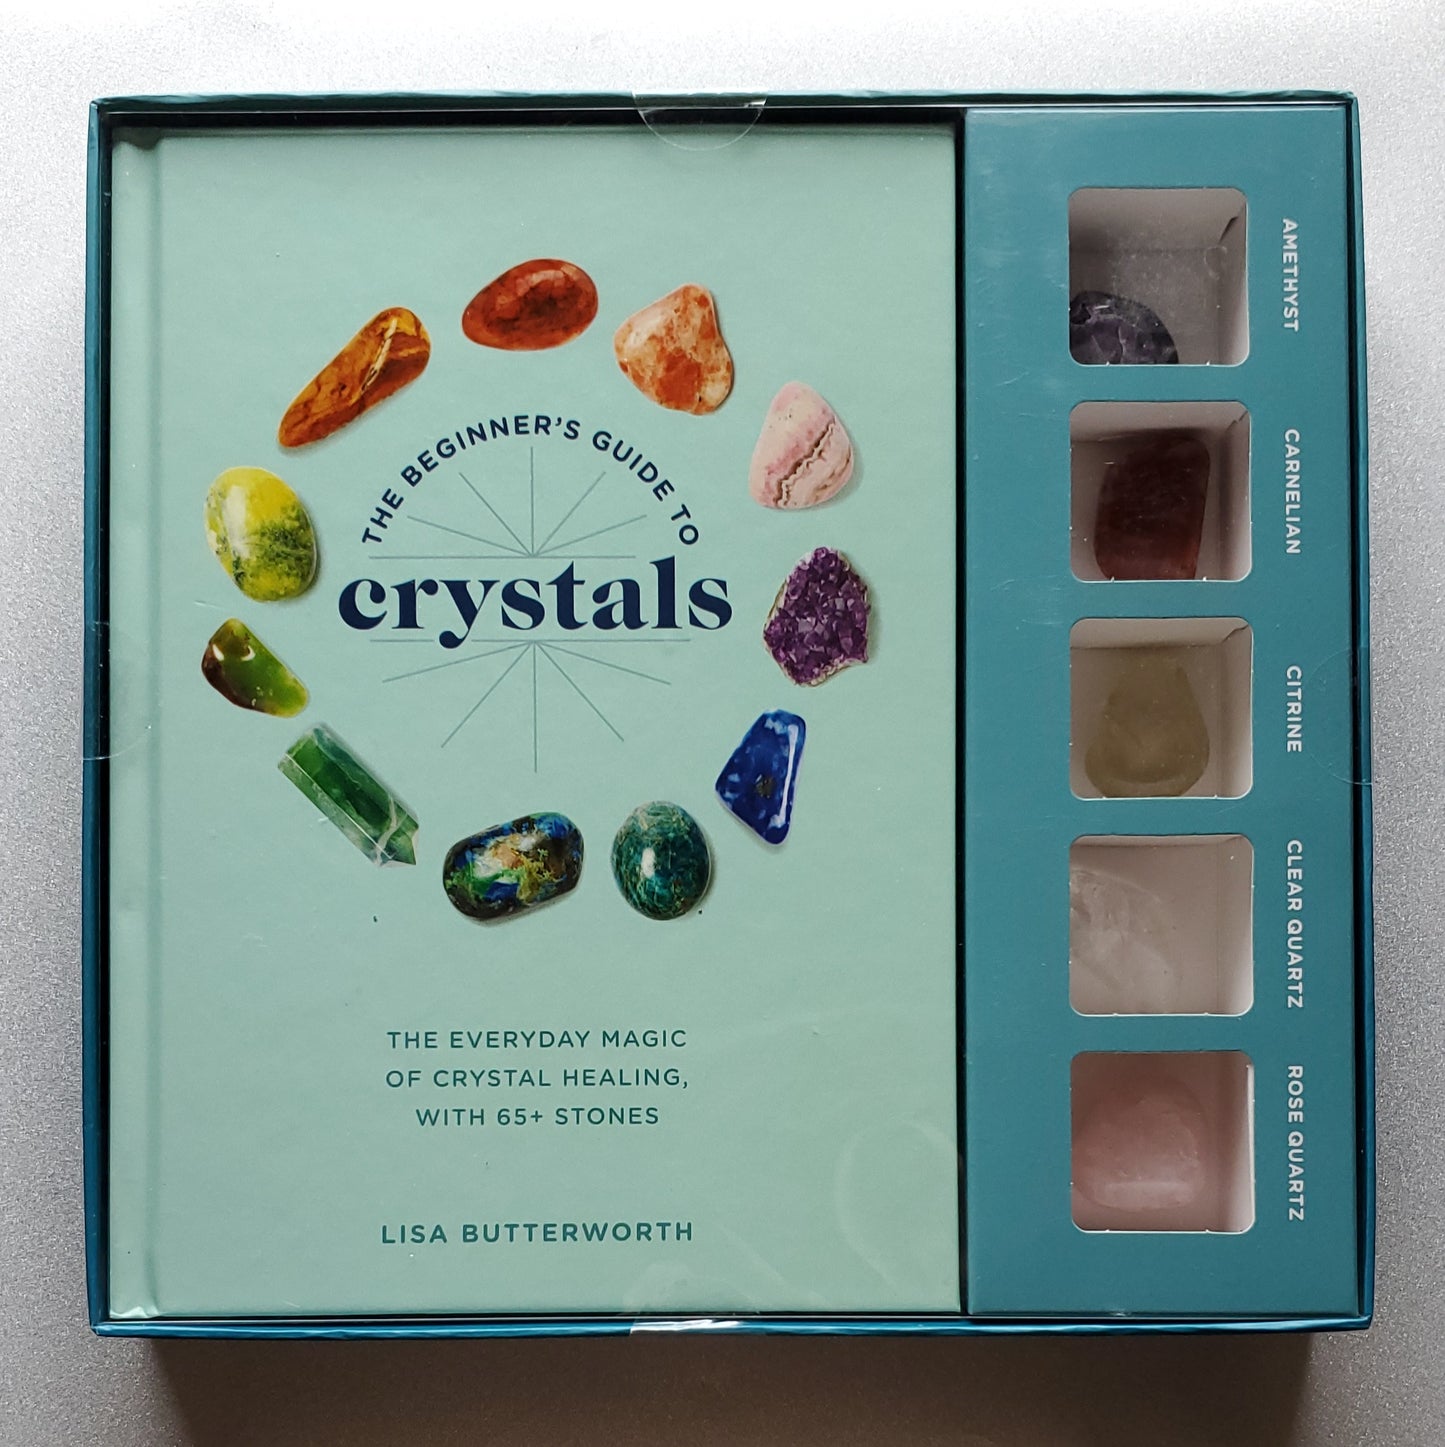 The Beginners Guide to Crystals 160 Page Book with 5 Bonus Crystals  Magical Mala   